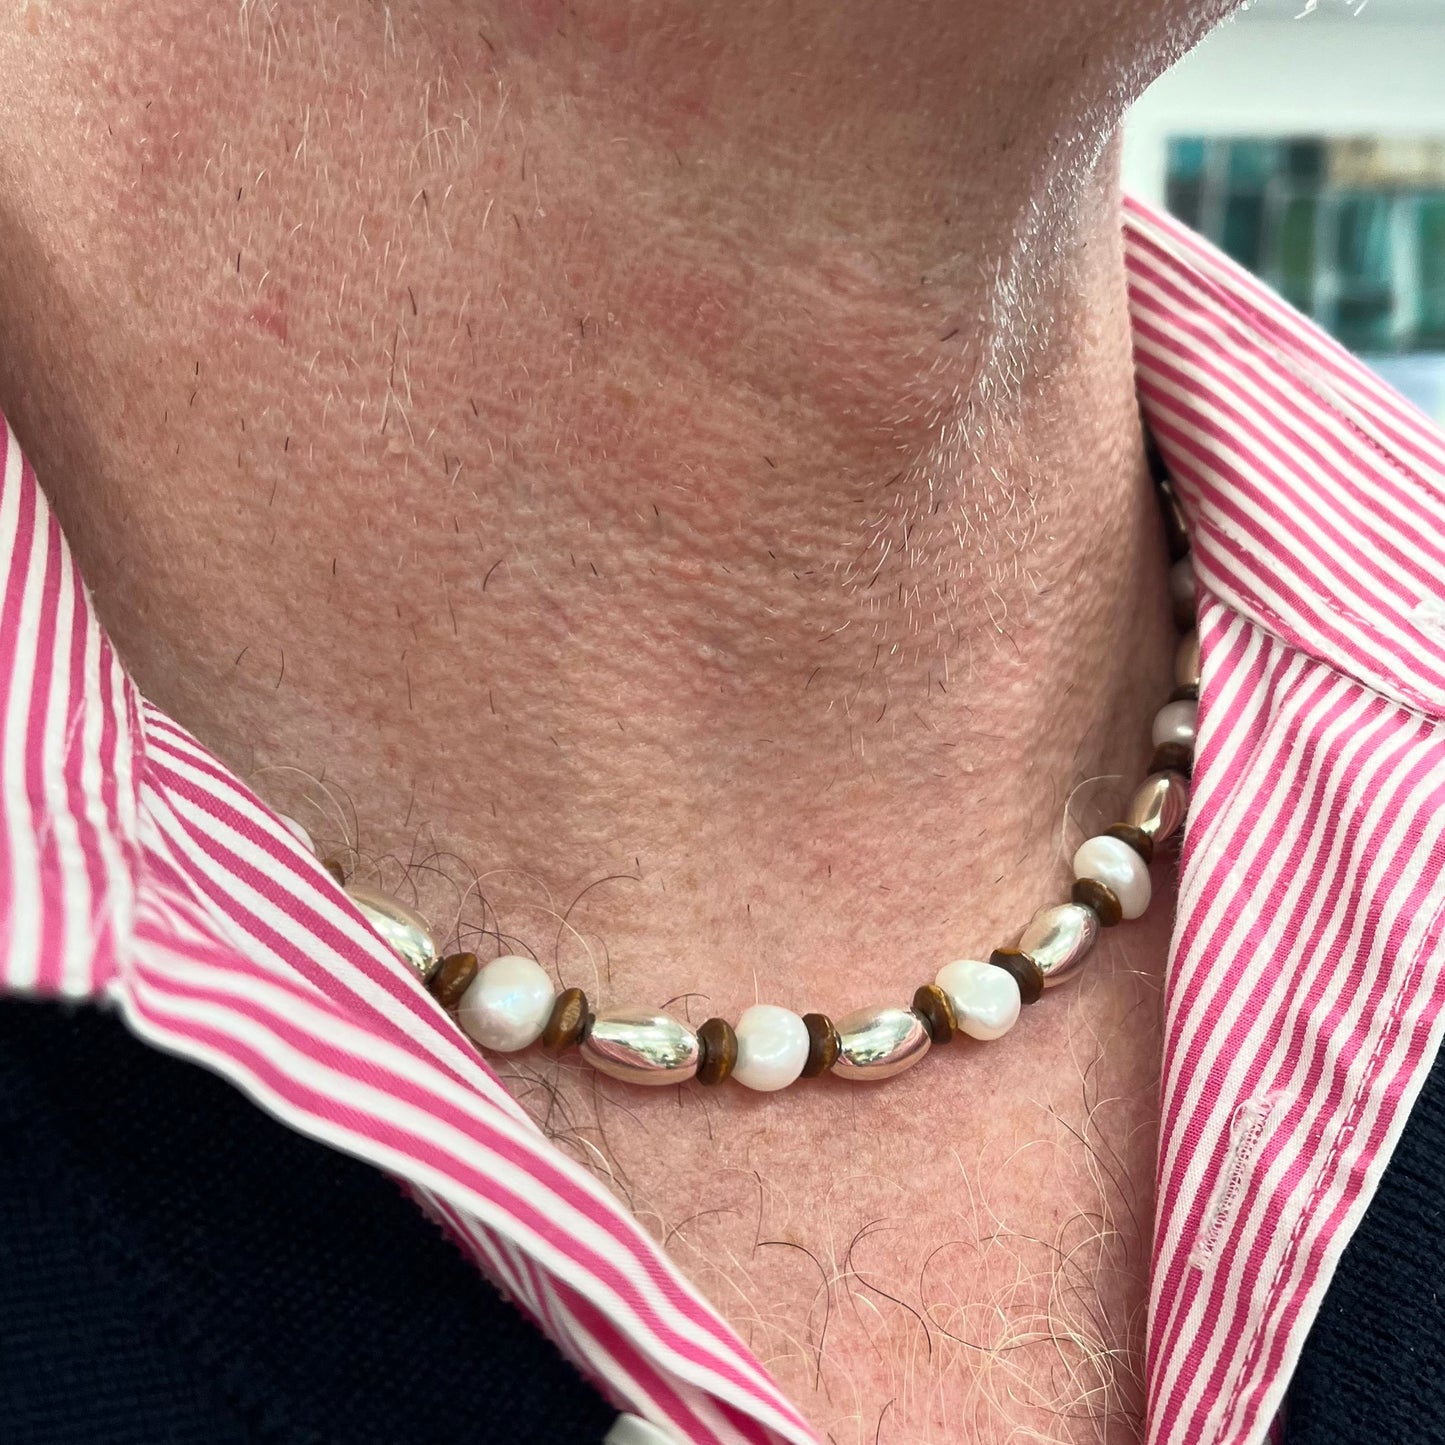 Gents Alternating Pearl Wood and Silver Beaded Necklace